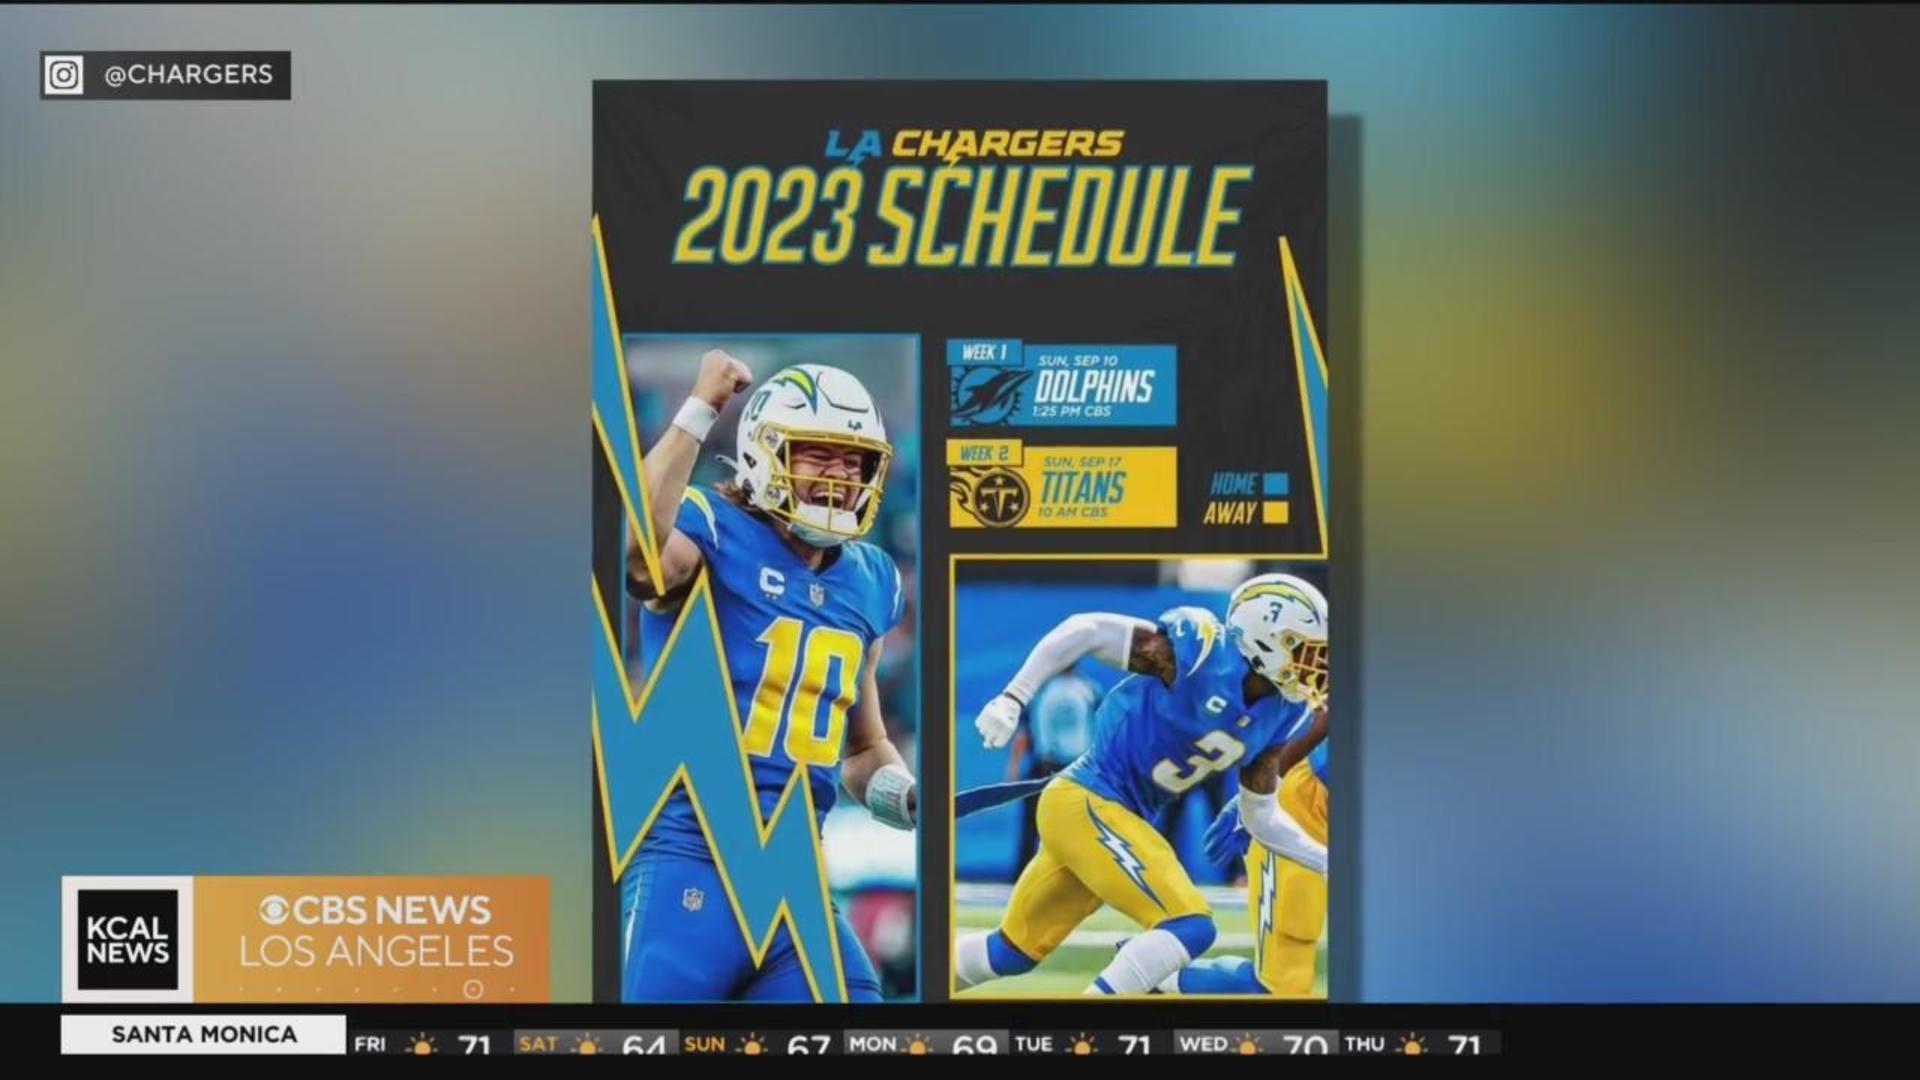 Uniform Schedule is out! : r/Chargers